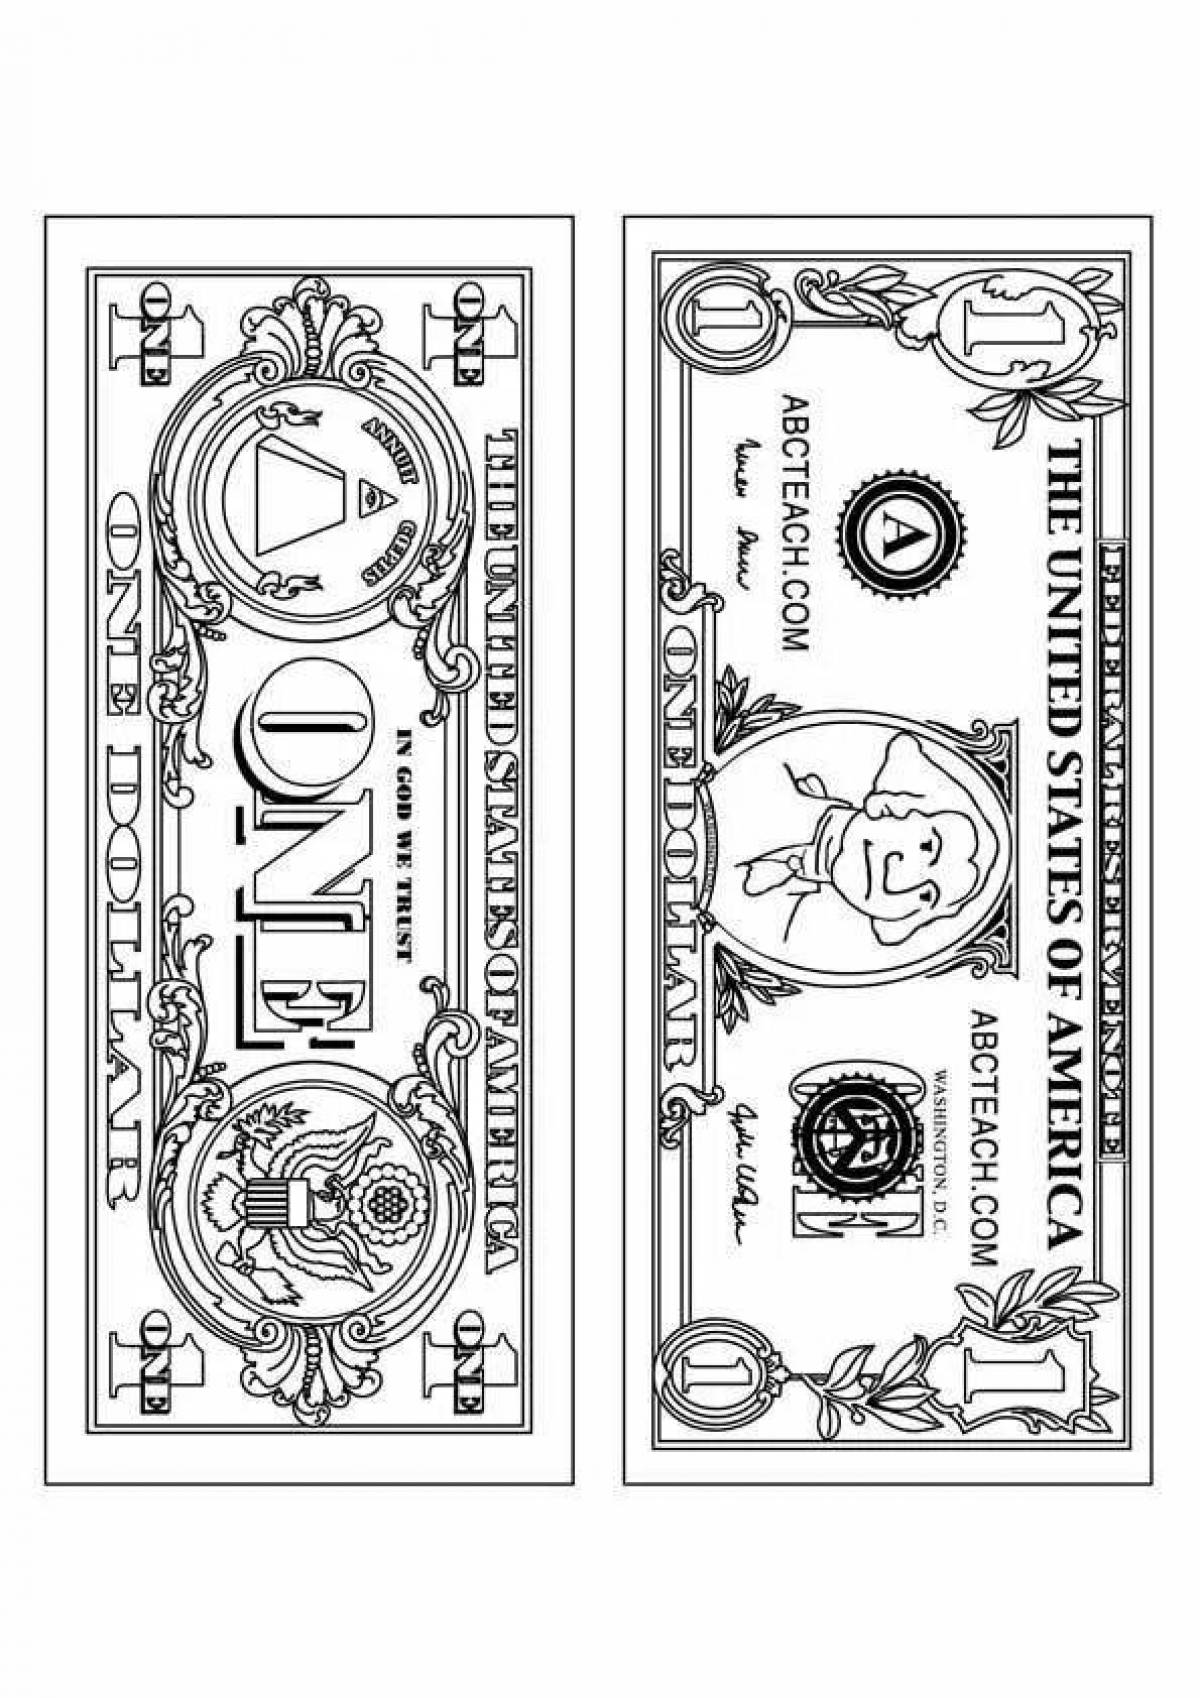 Real money fat coloring book